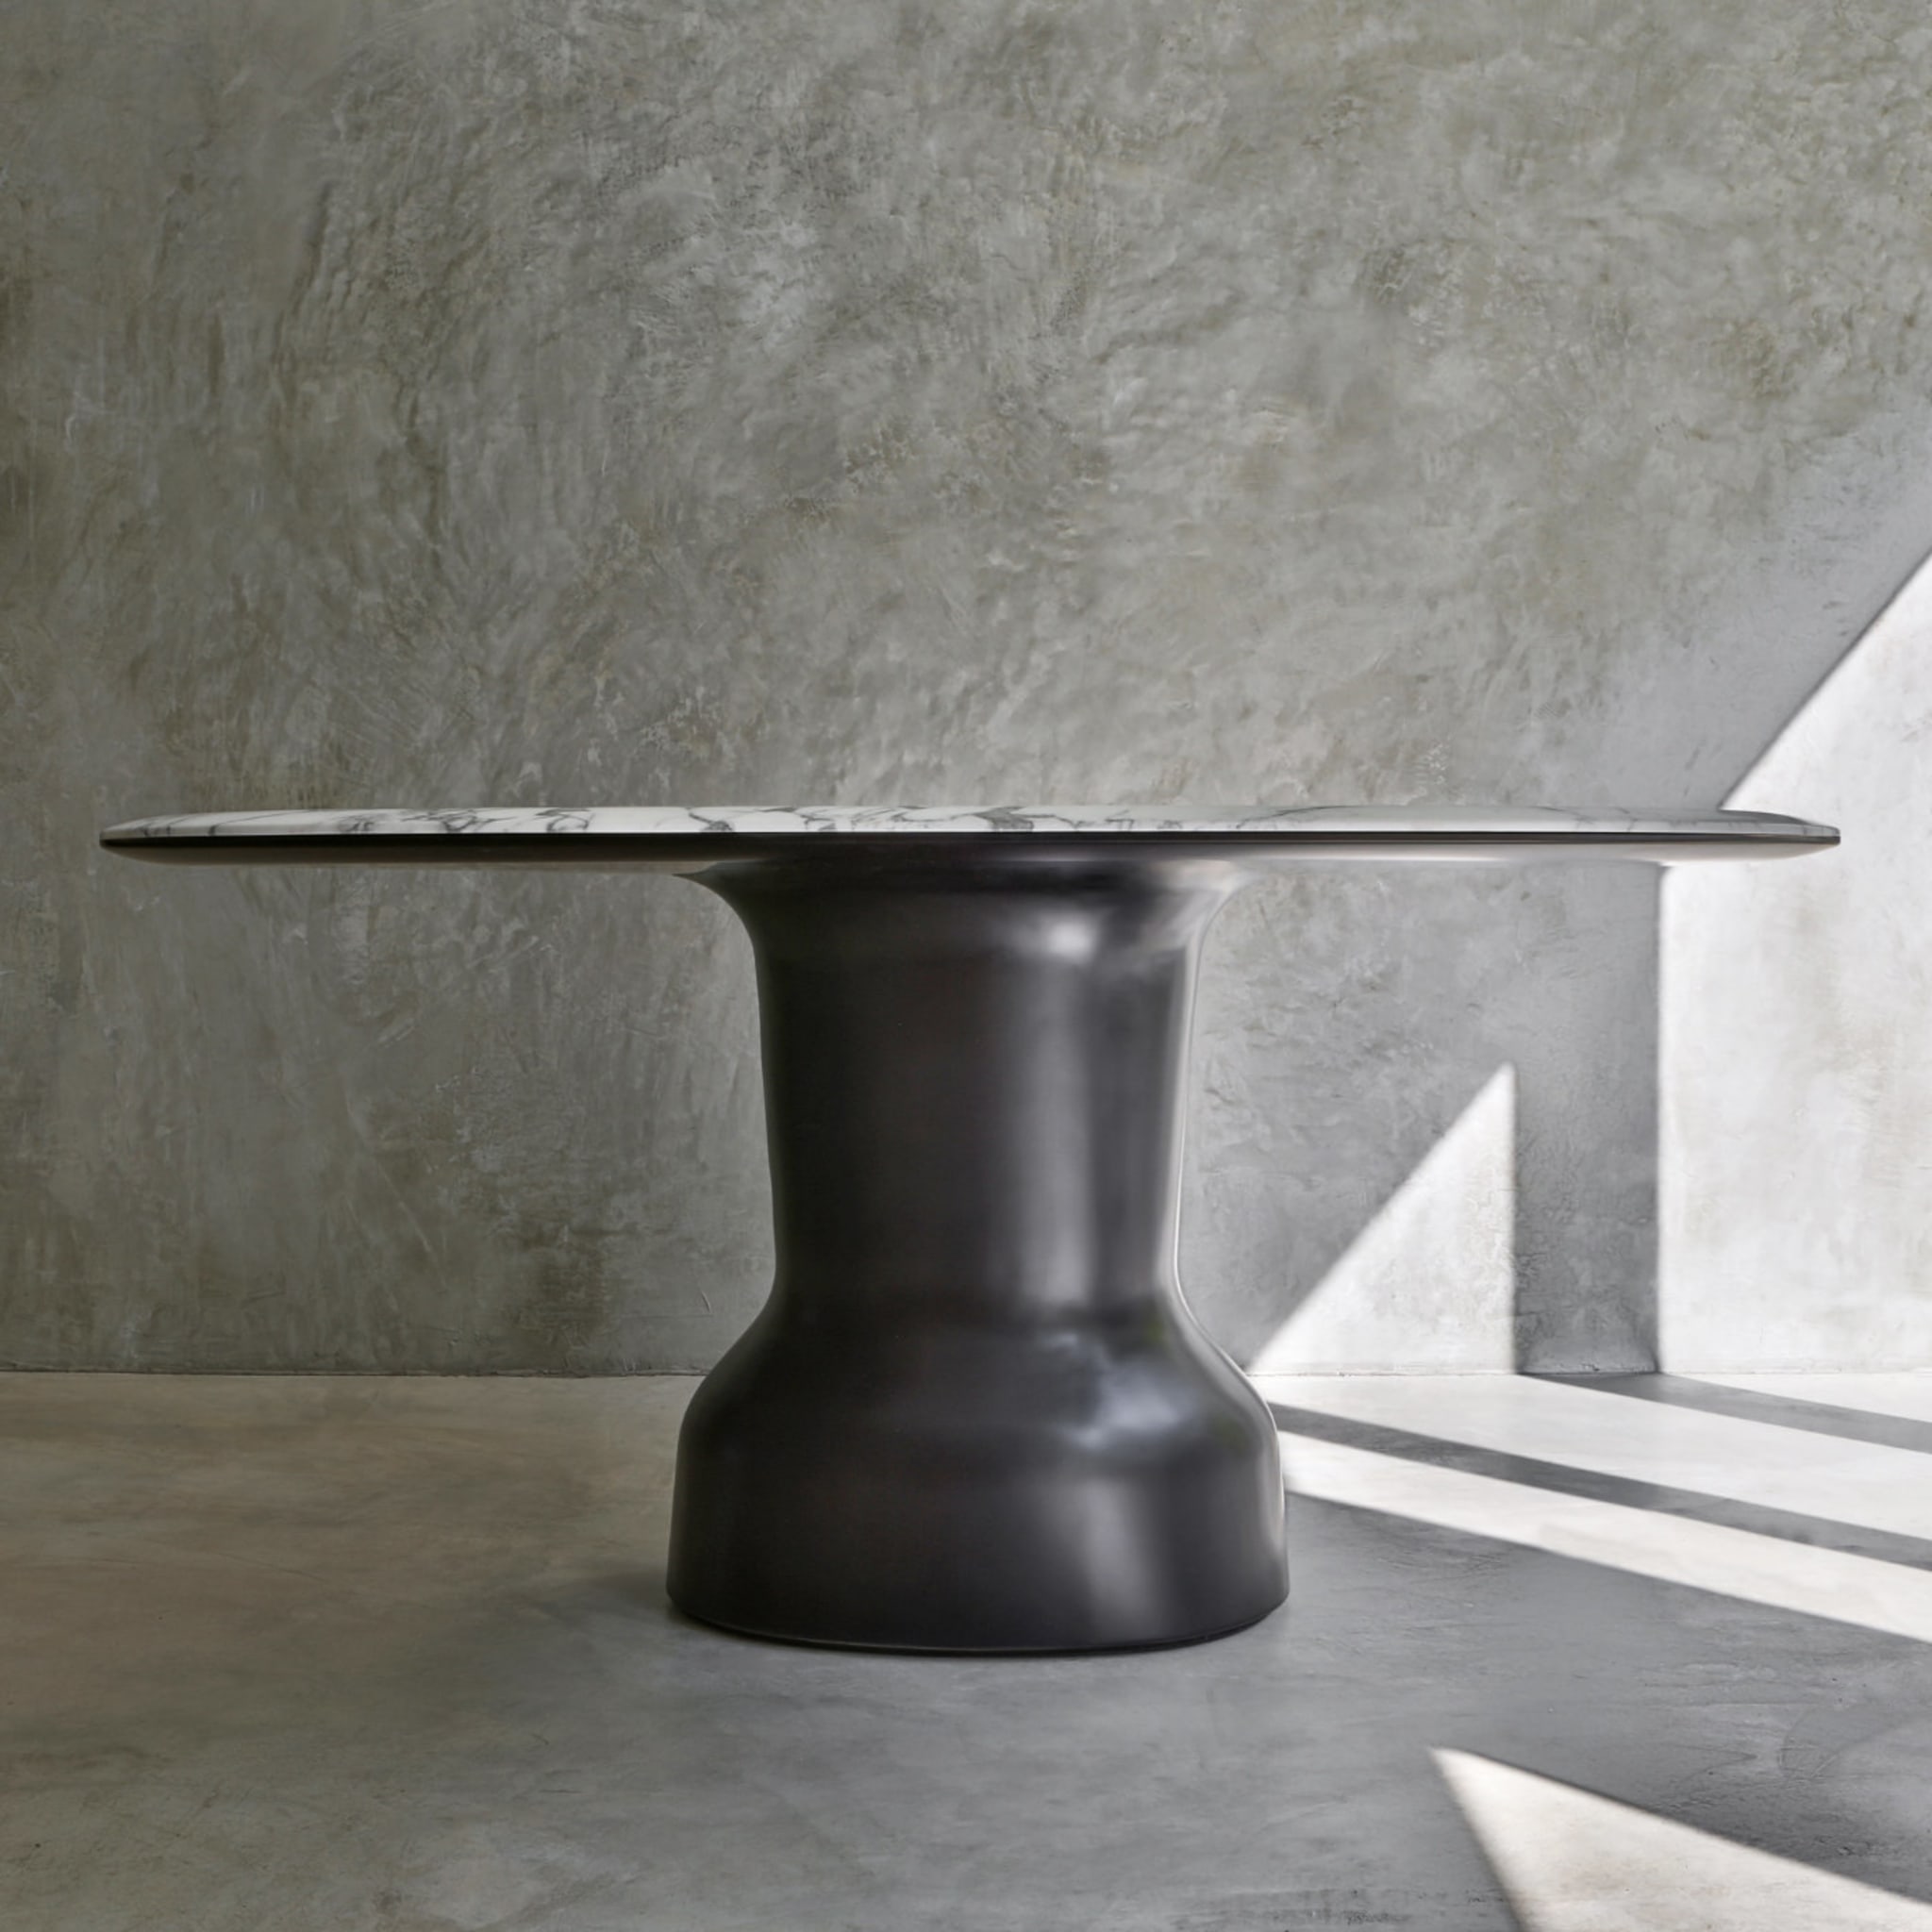 Musa Table by Emanuele Genuizzi - Alternative view 2